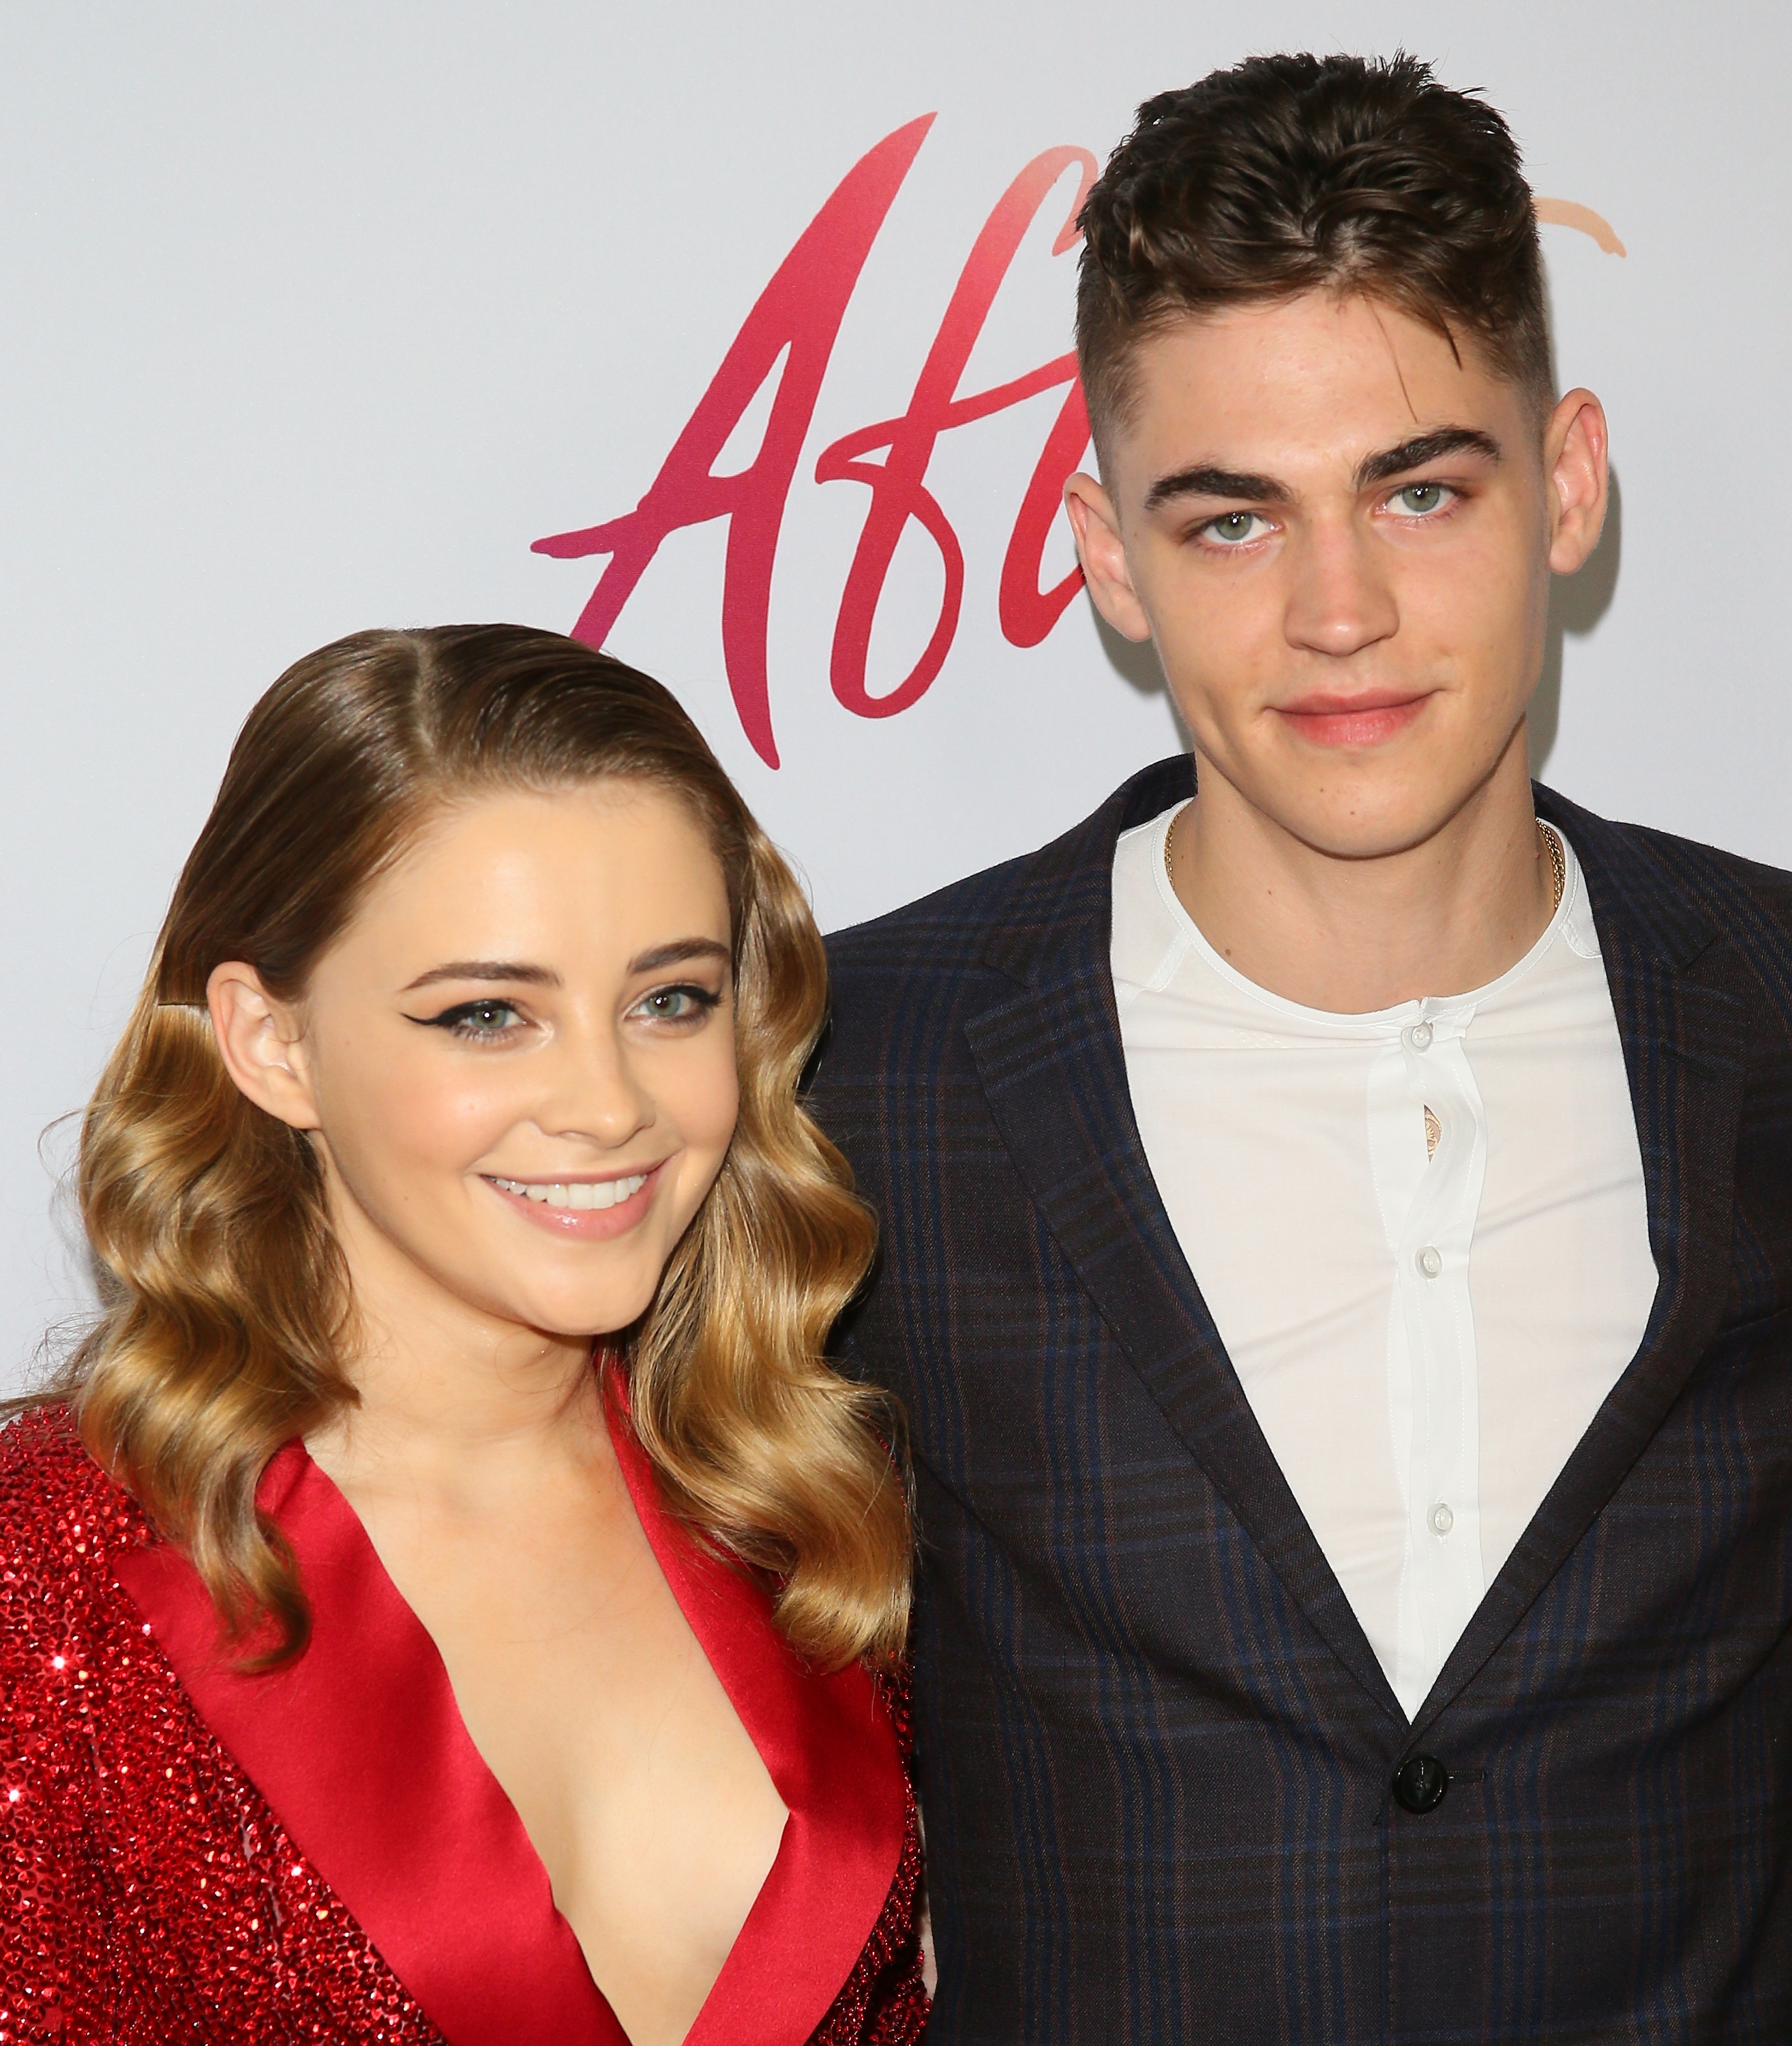 Josephine Langford and Hero Fiennes Tiffin at the premiere of "After" on April 8, 2019, in Los Angeles, California. | Source: Getty Images